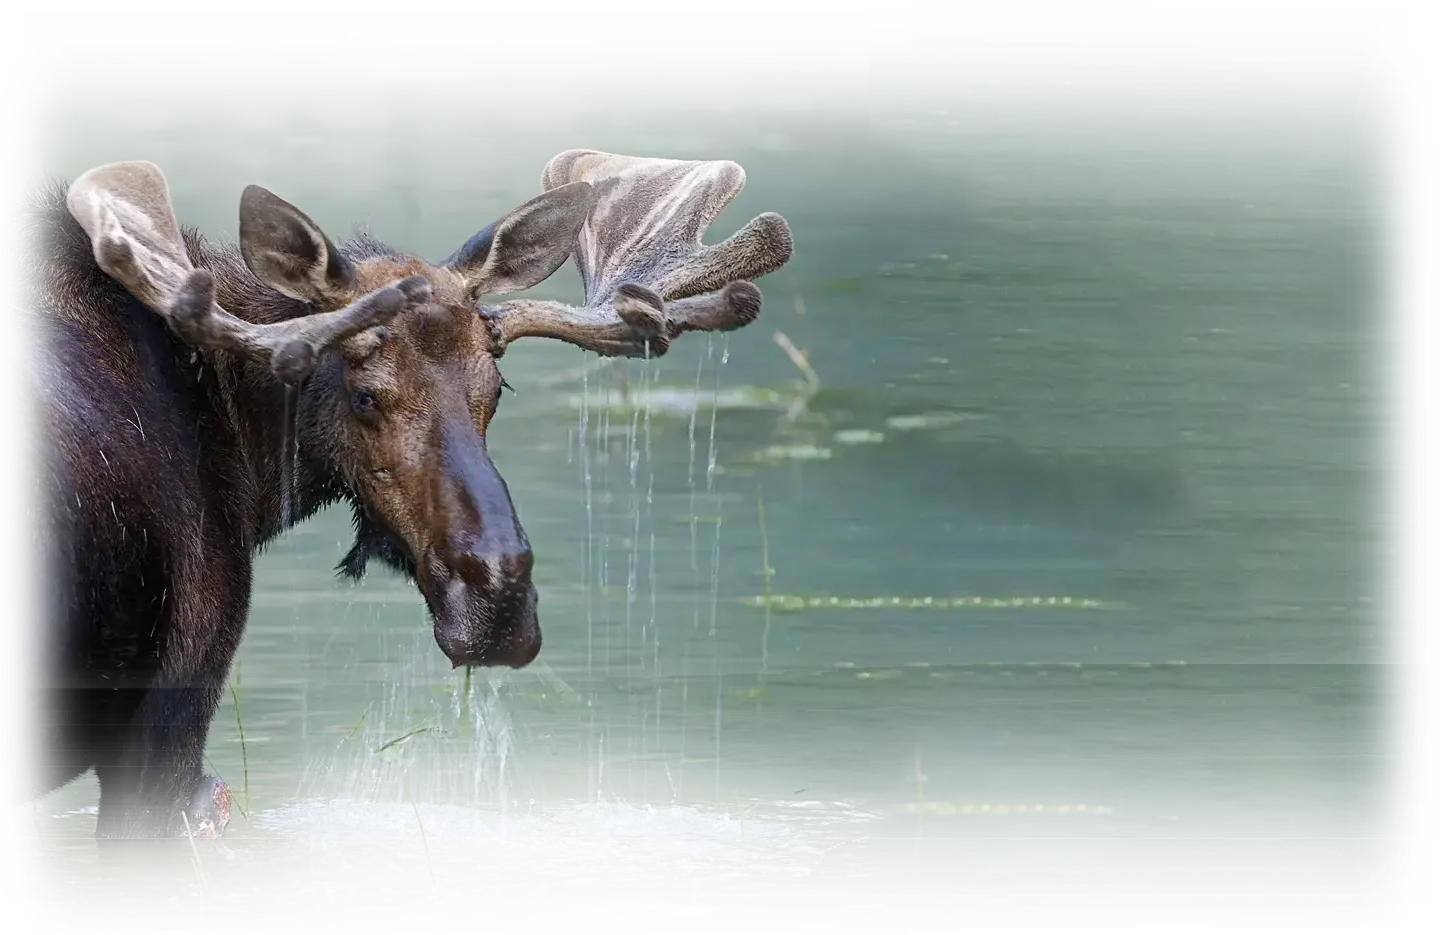 Wildlife in Glacier National Park. Enjoy the tranquility and peacefulness of the Park. Stay at Glacier Bear Cabin Inside Glacier. Close to Lake McDonald